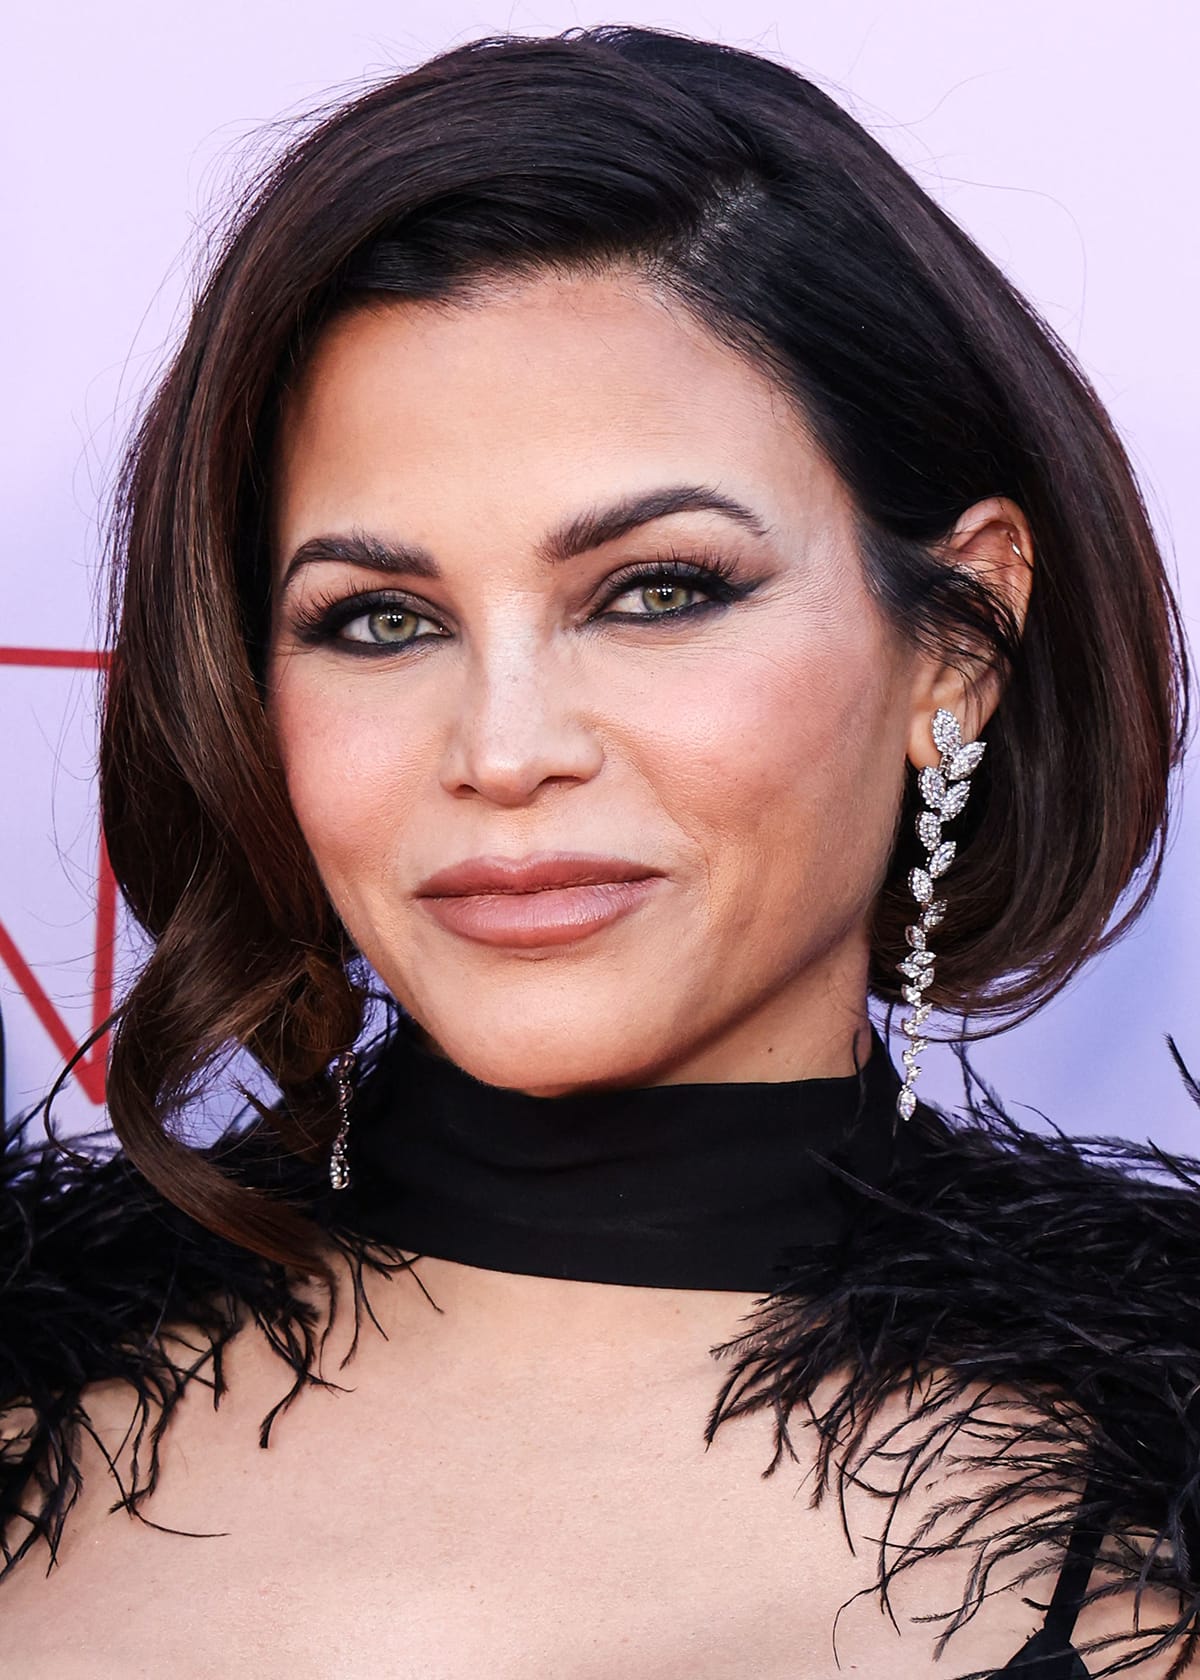 Jenna Dewan debuts a shorter bob hairstyle and completes the gothic-glam theme of her black feathered look with black smokey eyeshadow, kohl-rimmed eyes, and nude pink lipstick